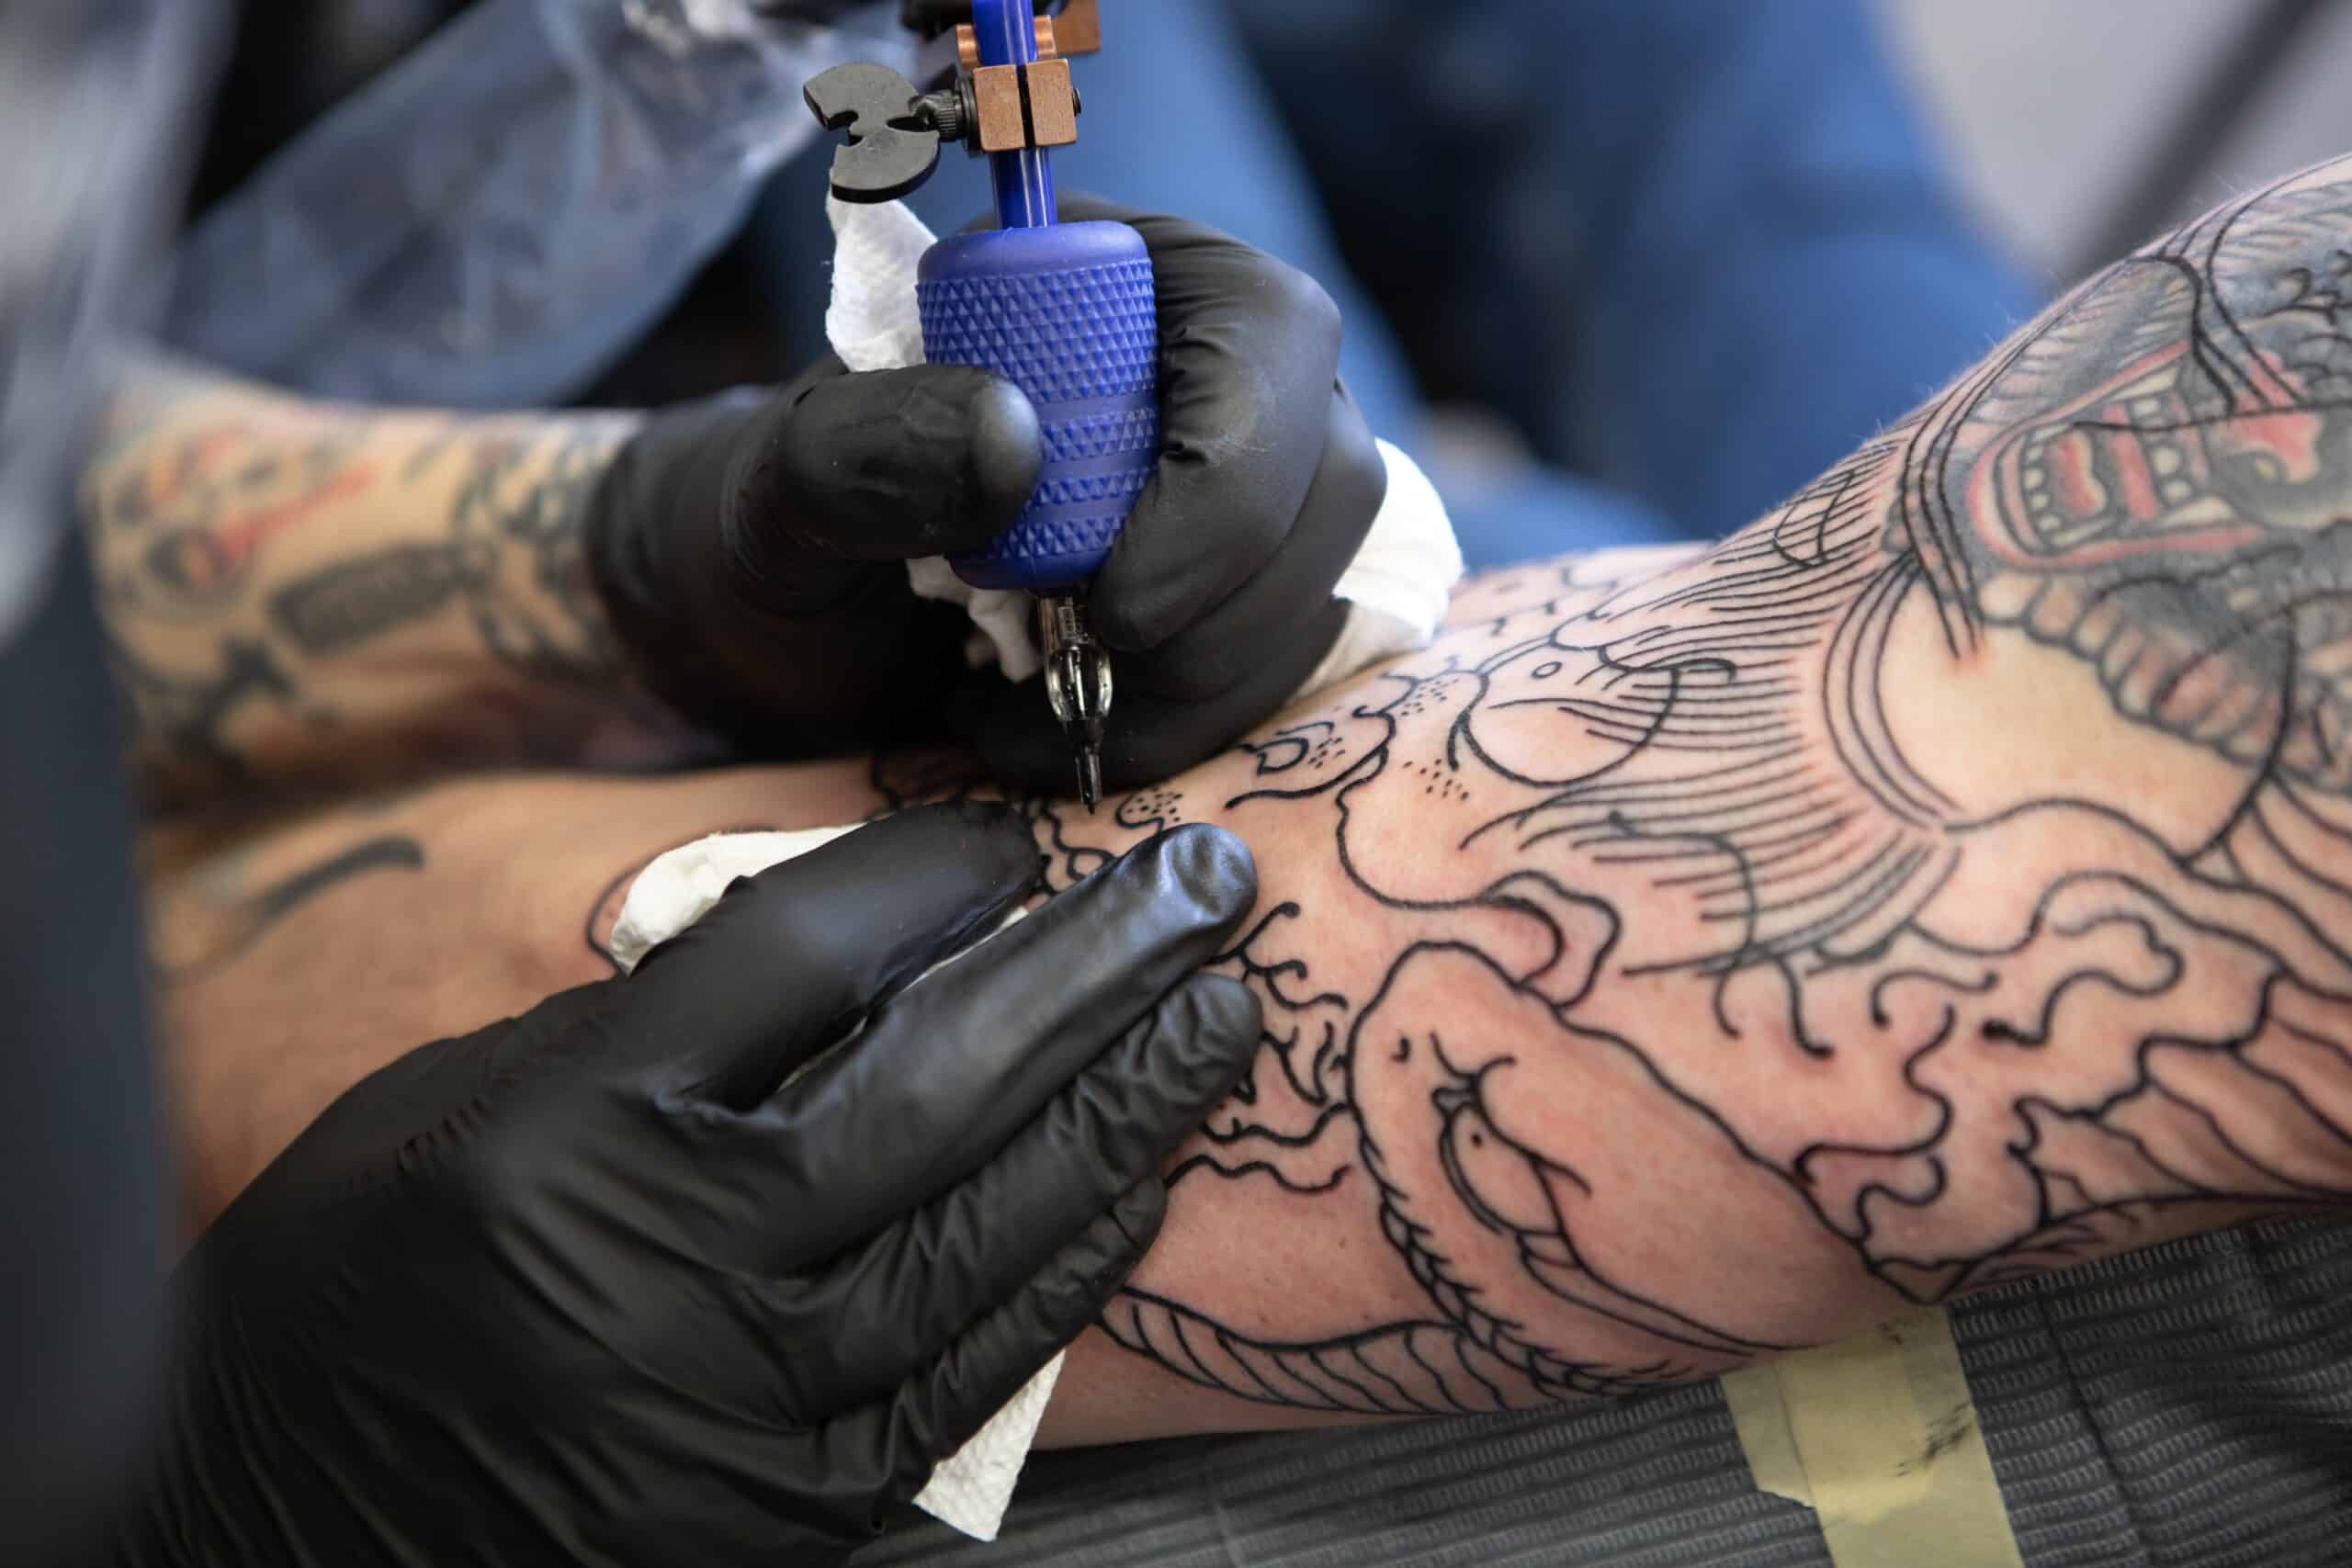 Could Having a Tattoo Result in a Lawsuit?